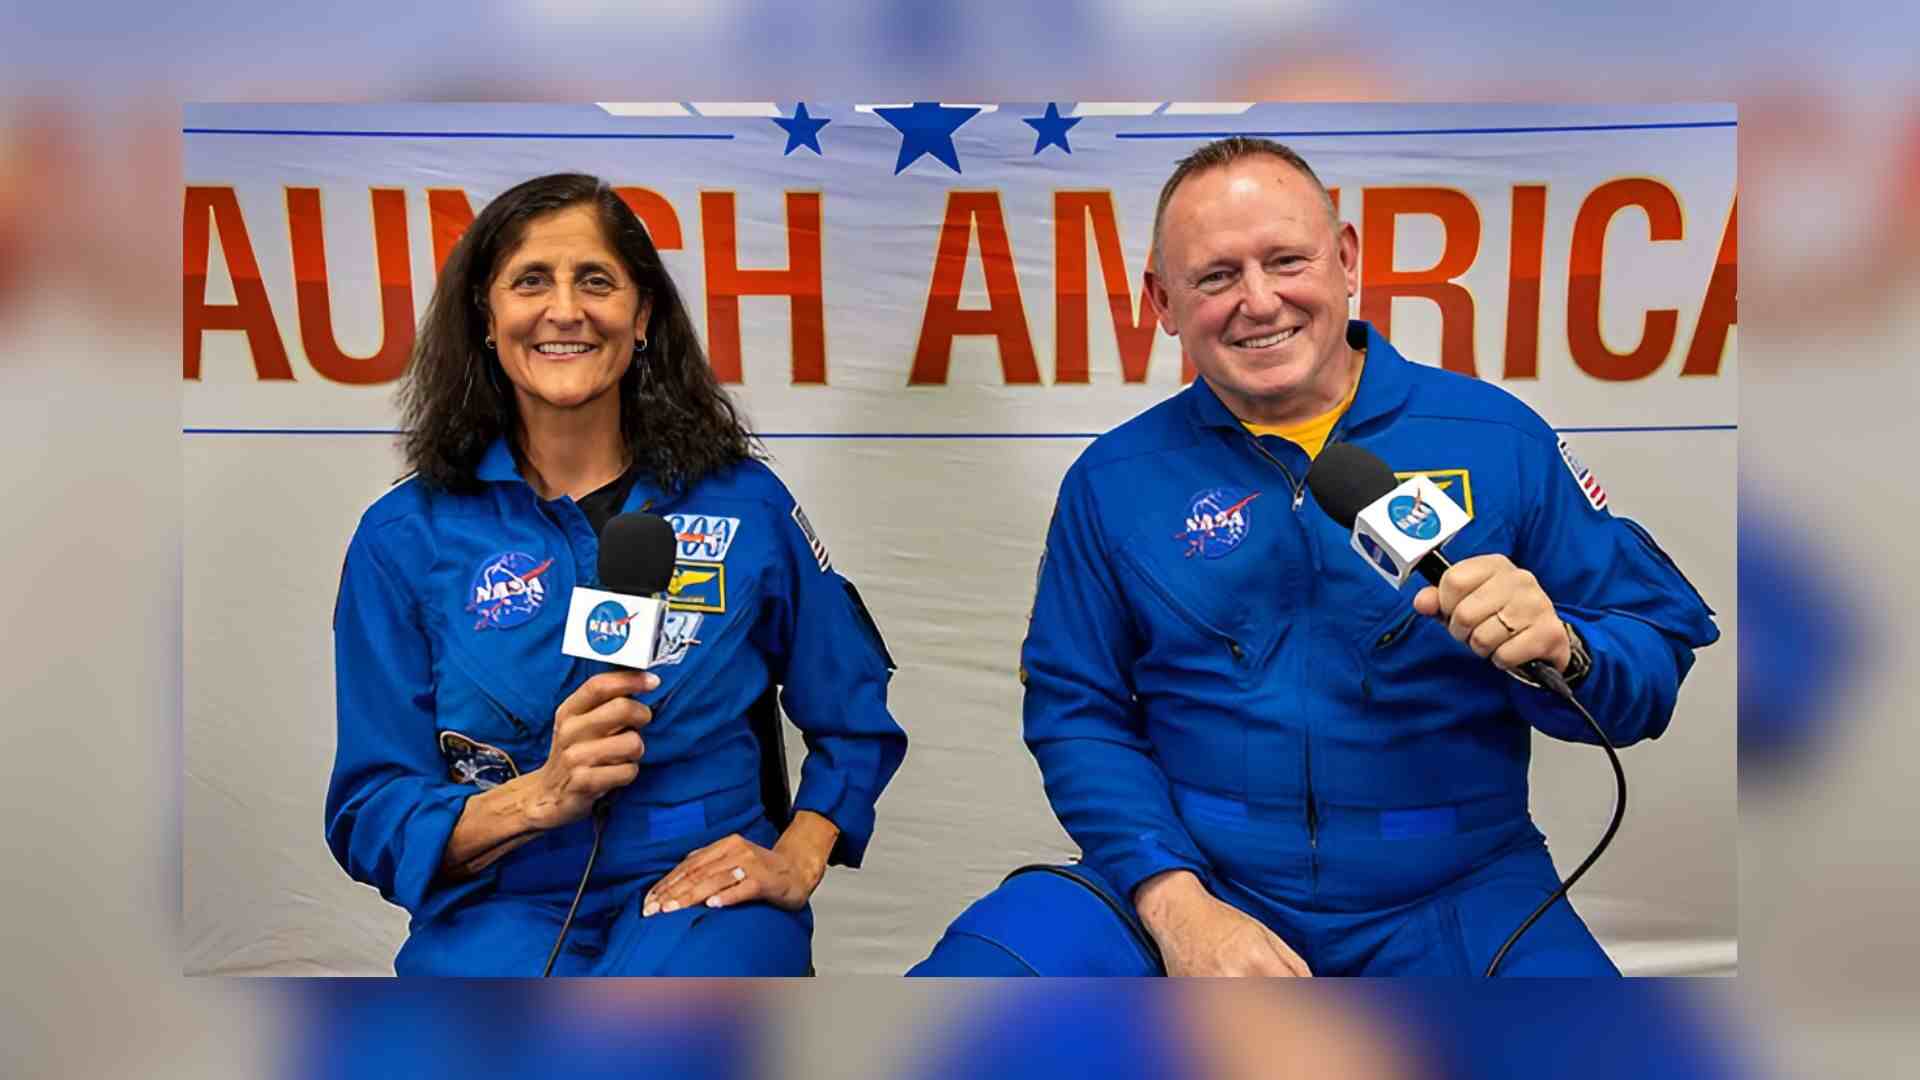 Sunita Williams Stranded In Space: NASA To Reveal Crucial Update On Safe Return